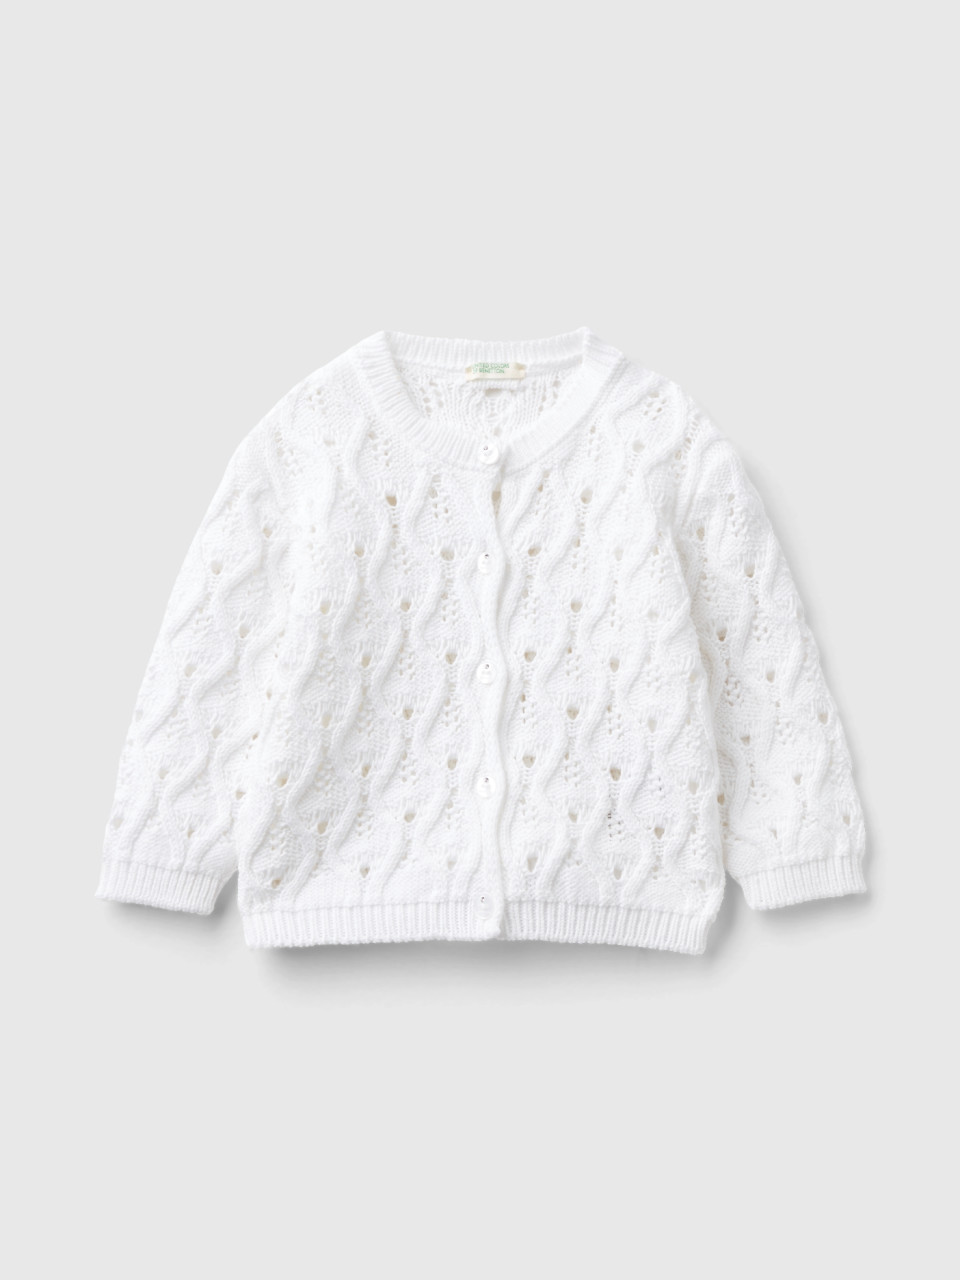 Benetton, Knit Cardigan In Pure Cotton, White, Kids